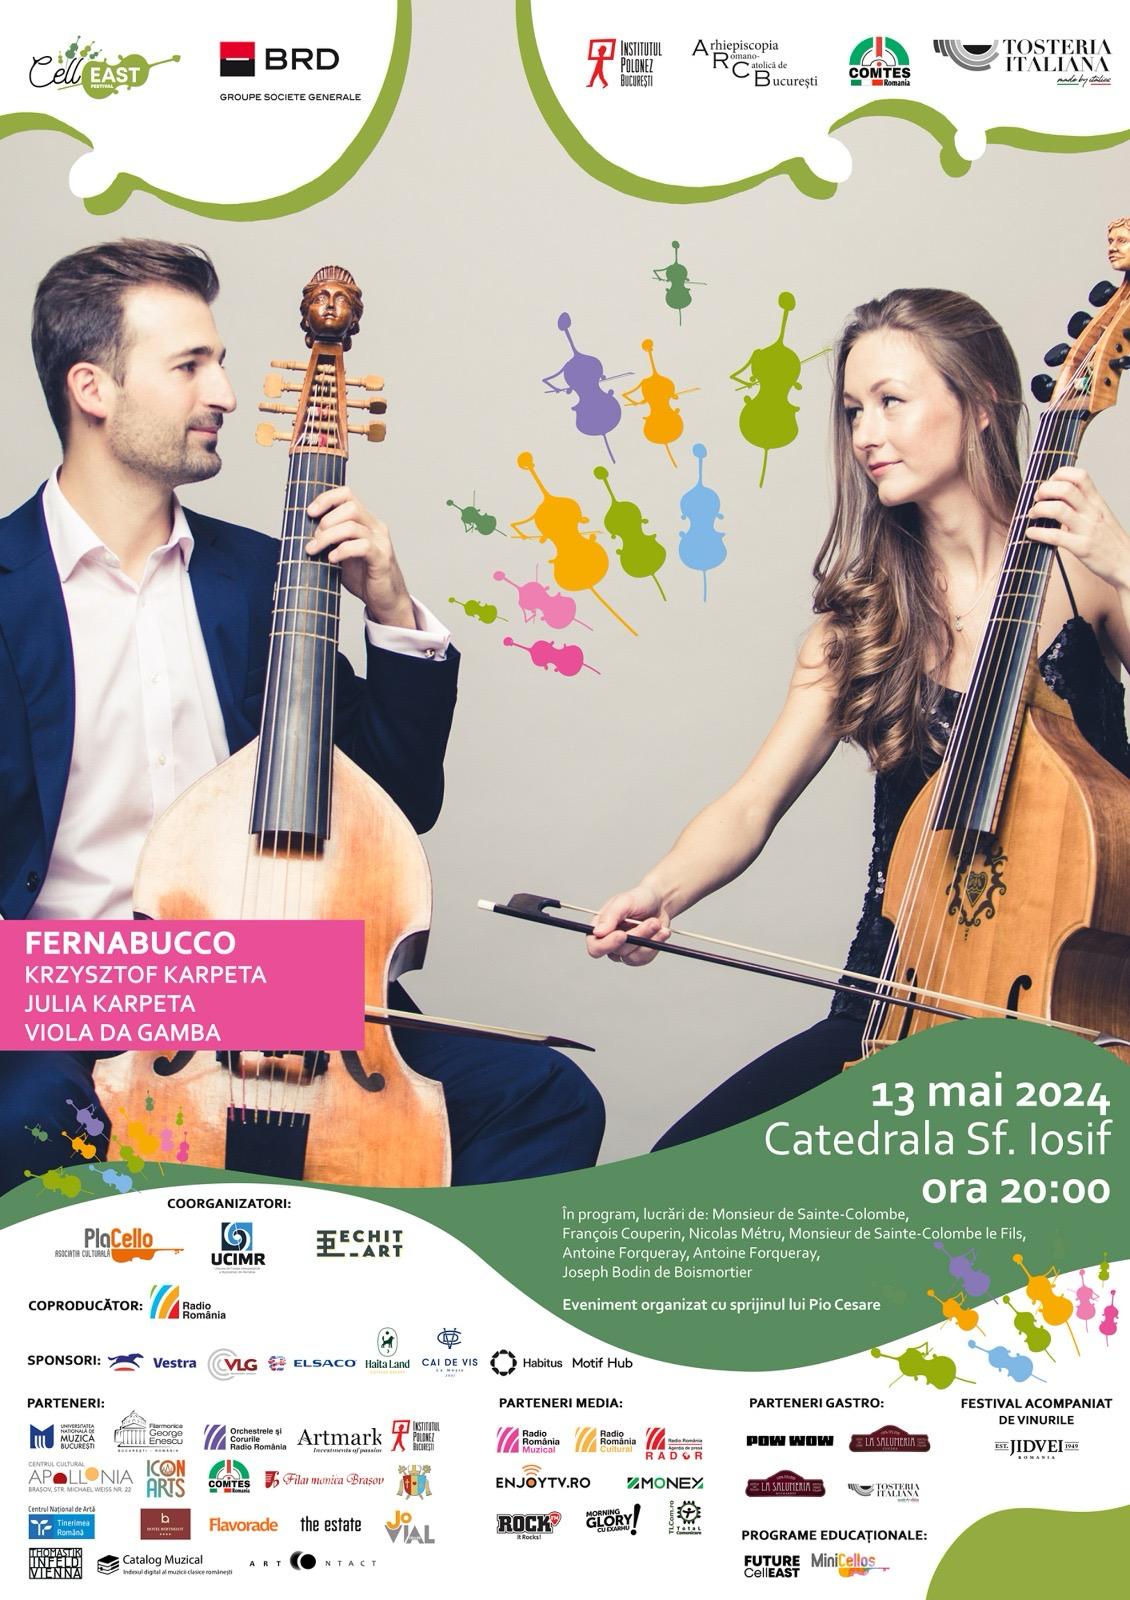 Concert in honor of the 25th anniversary of the visit of St. John Paul II to Romania